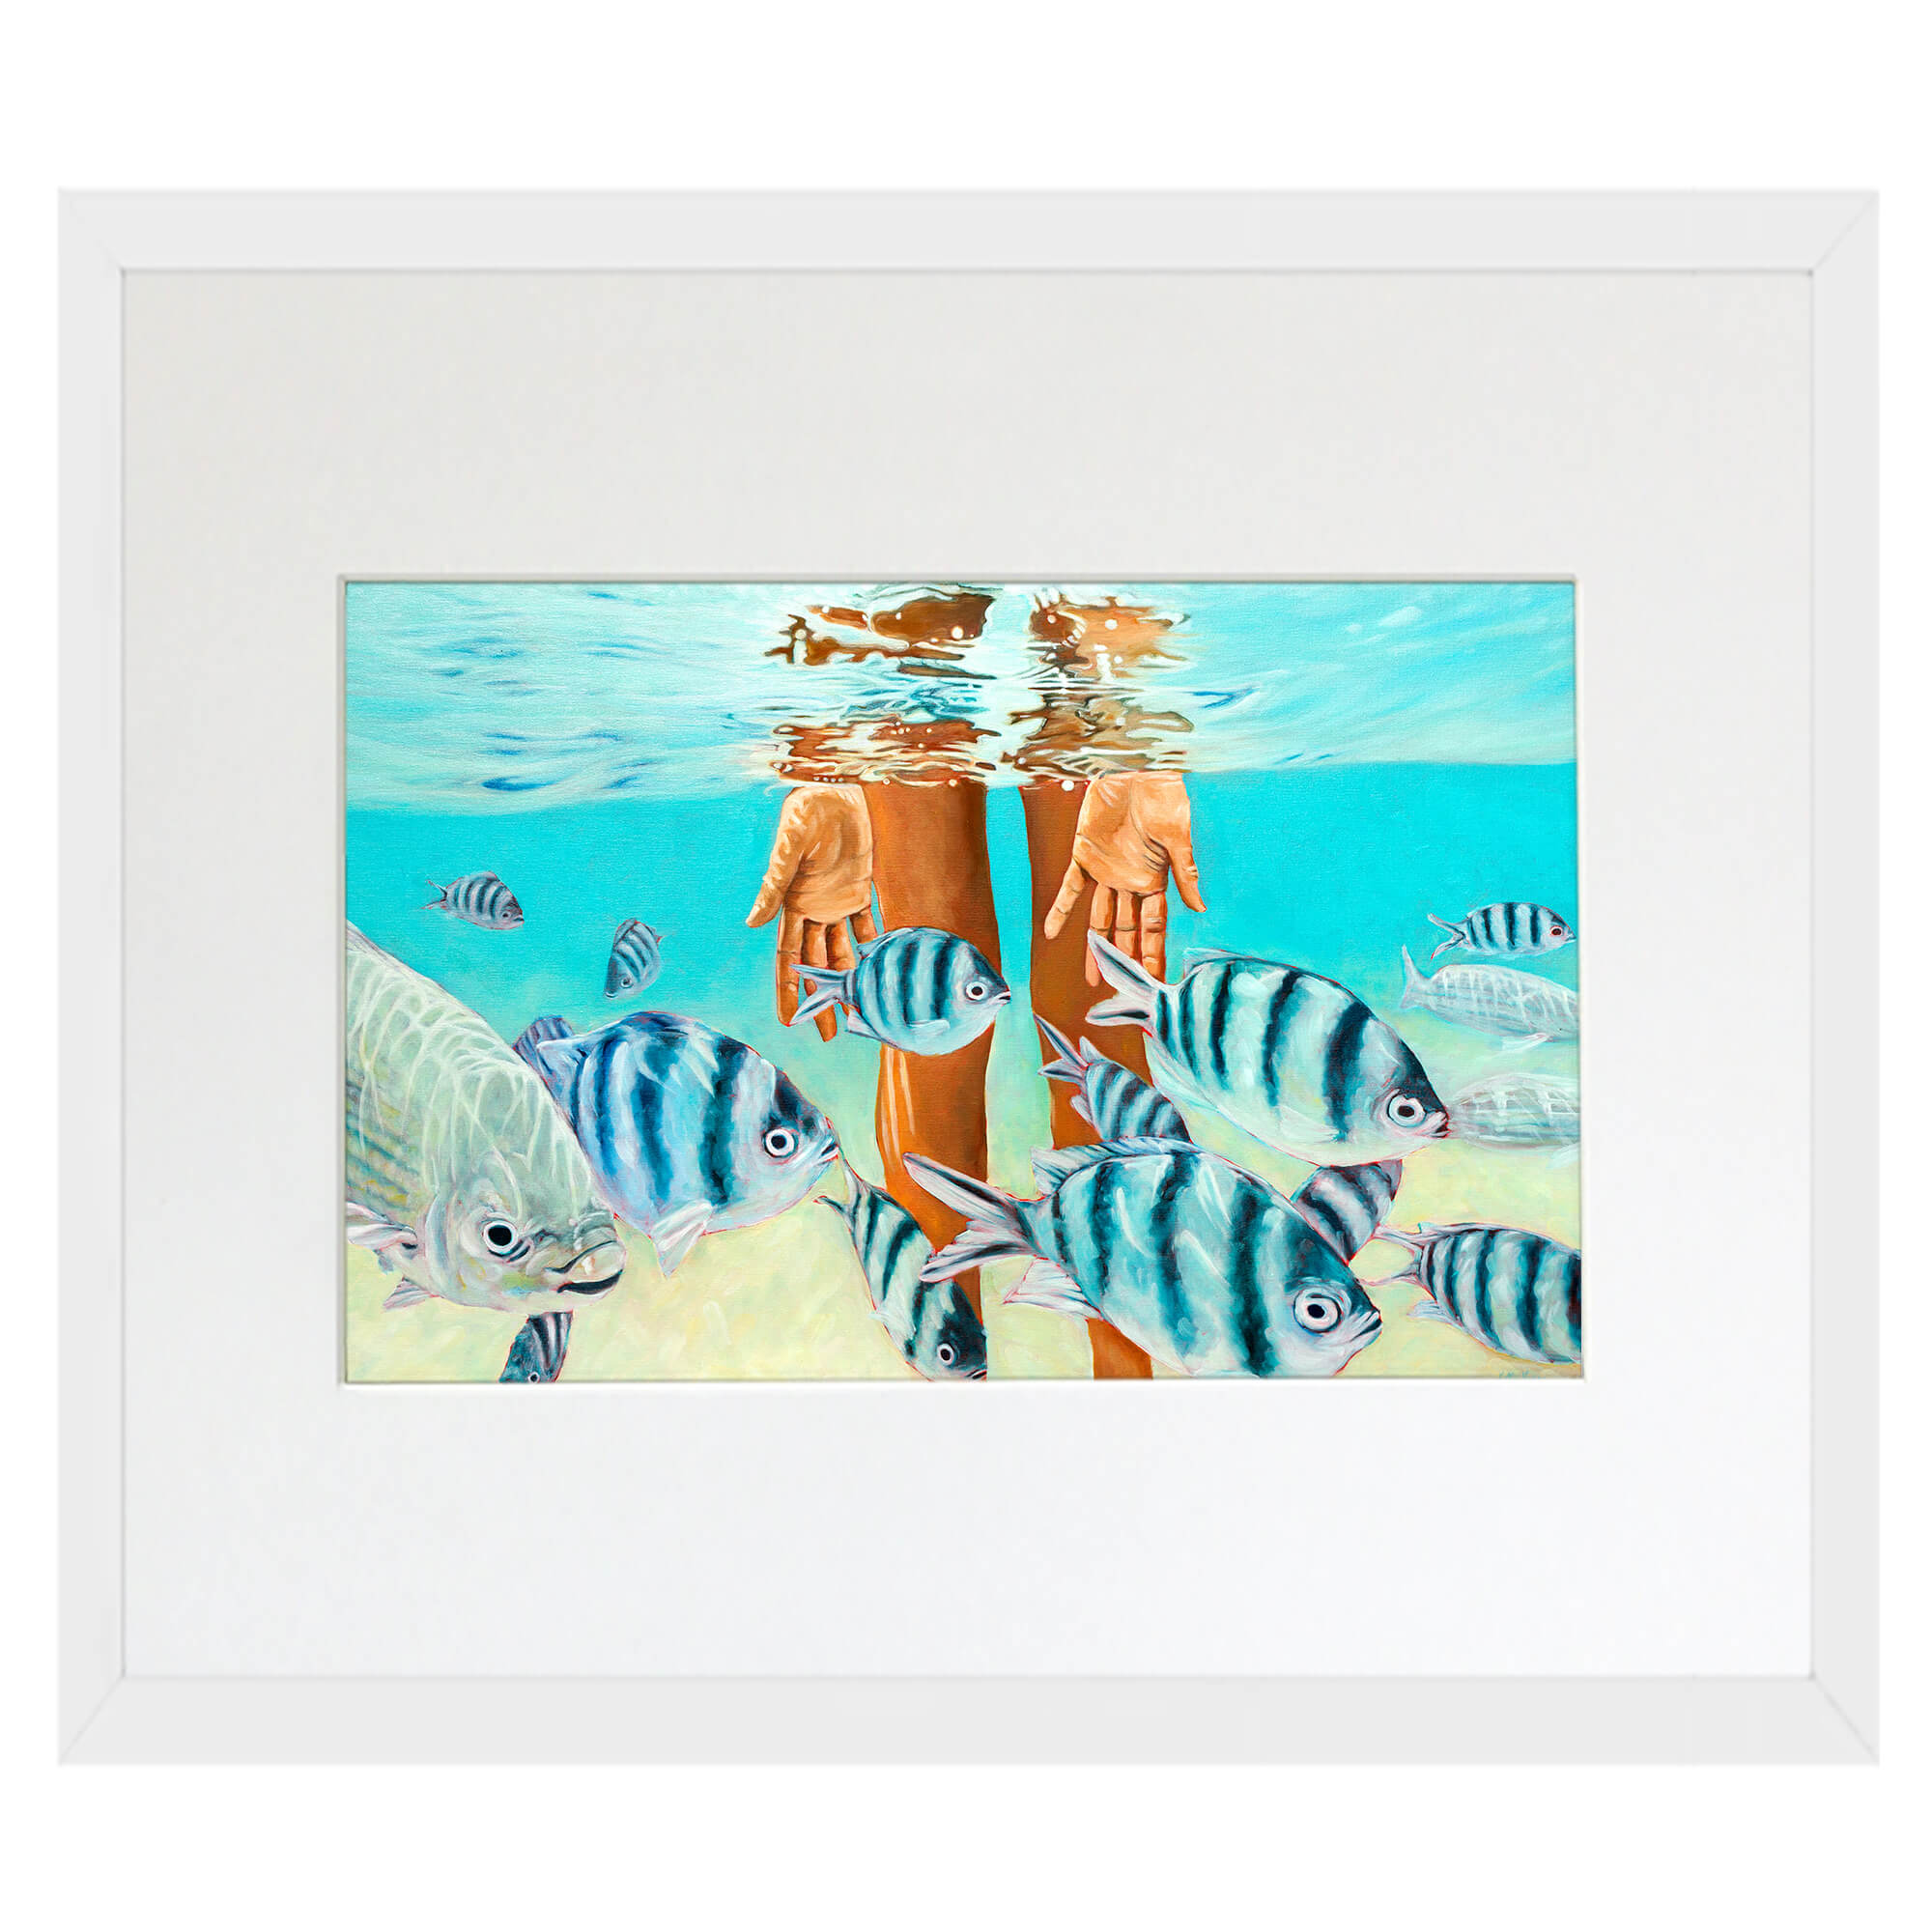 A matted art print featuring blue fishes swimming  by hawaii artist Kelly Keane